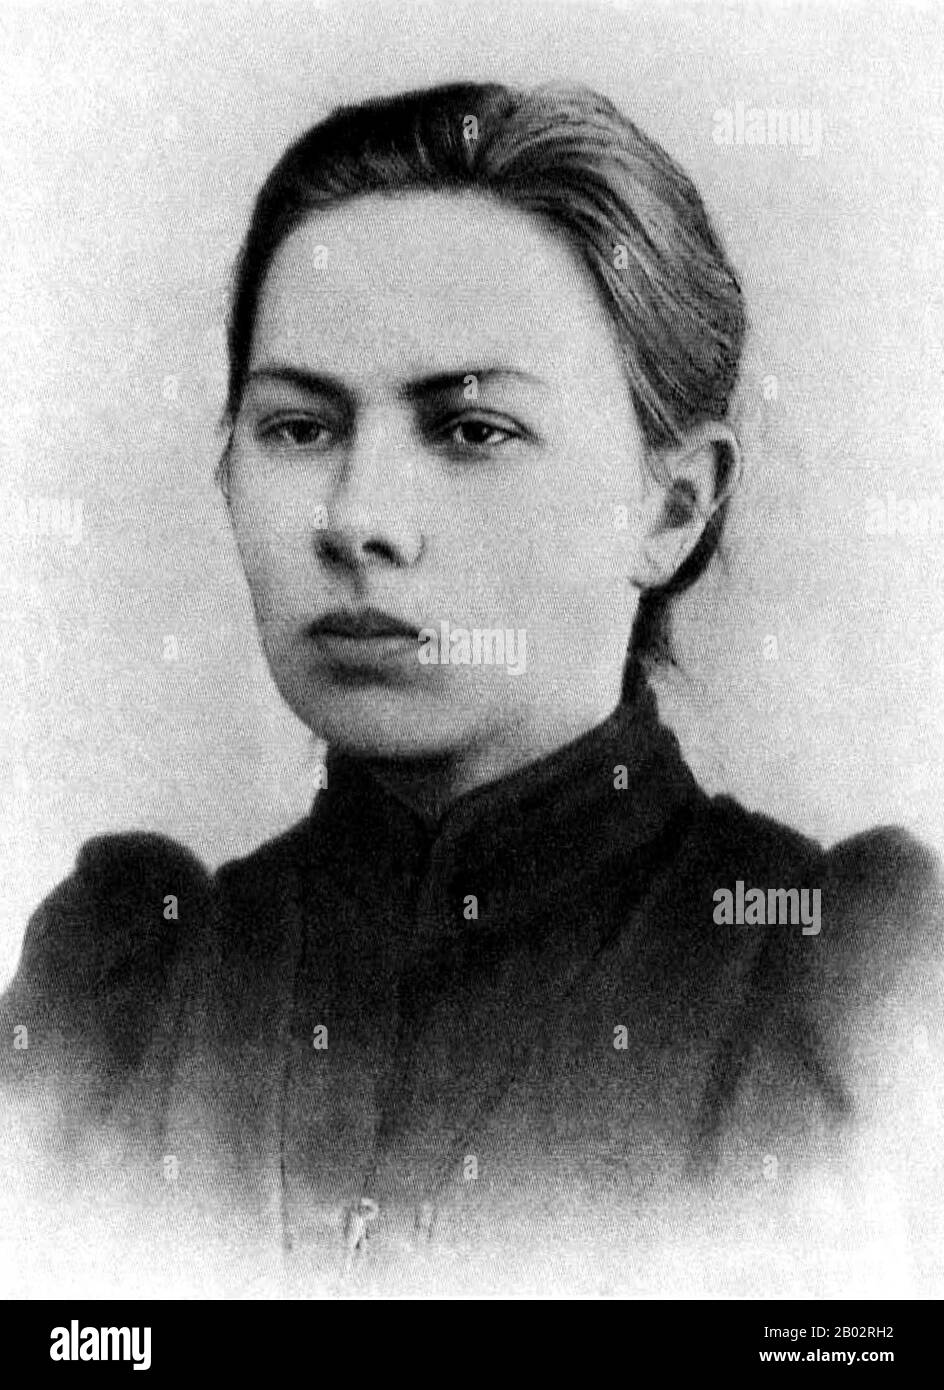 Nadezhda Konstantinovna 'Nadya' Krupskaya (26 February 1869 – 27 February 1939) was a Russian Bolshevik revolutionary and politician. She served as the Soviet Union's Deputy Minister of Education from 1929 until her death in 1939, and was the wife of Vladimir Lenin from 1898 until his death in 1924. Stock Photo